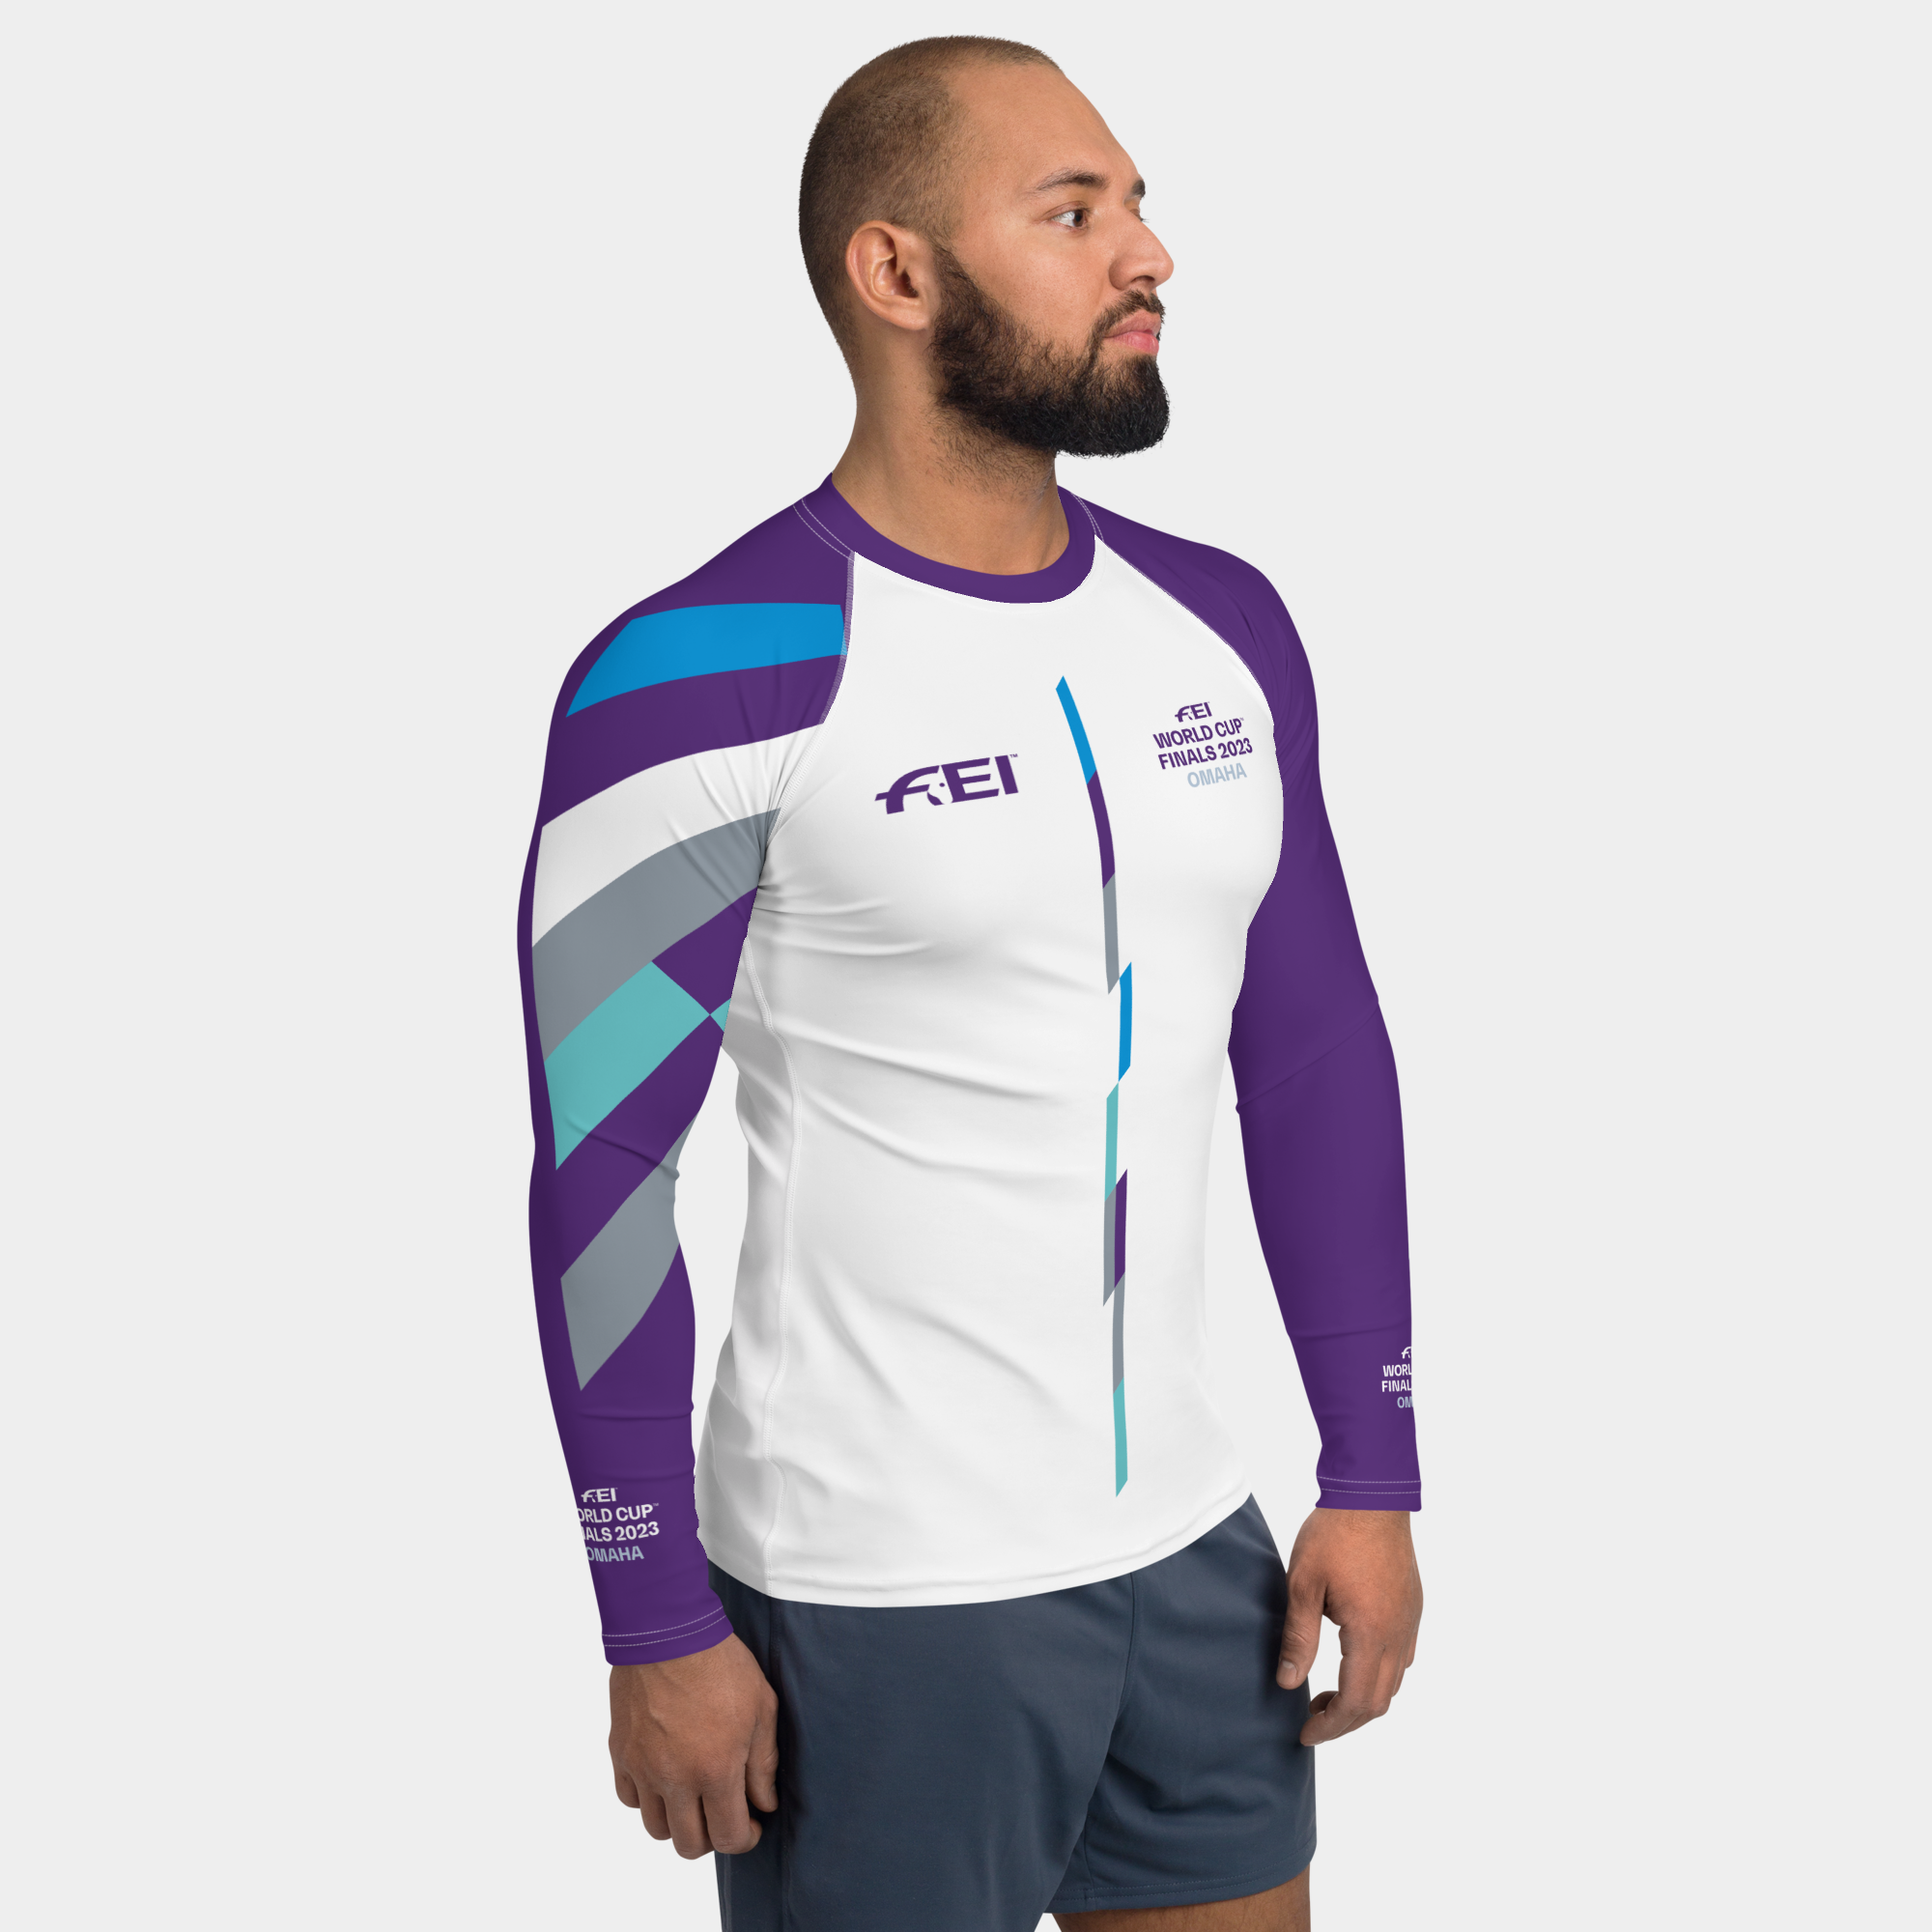 FEI World Cup Finals 2023 Omaha Unisex Athletic Jersey v2 FEI Official Store